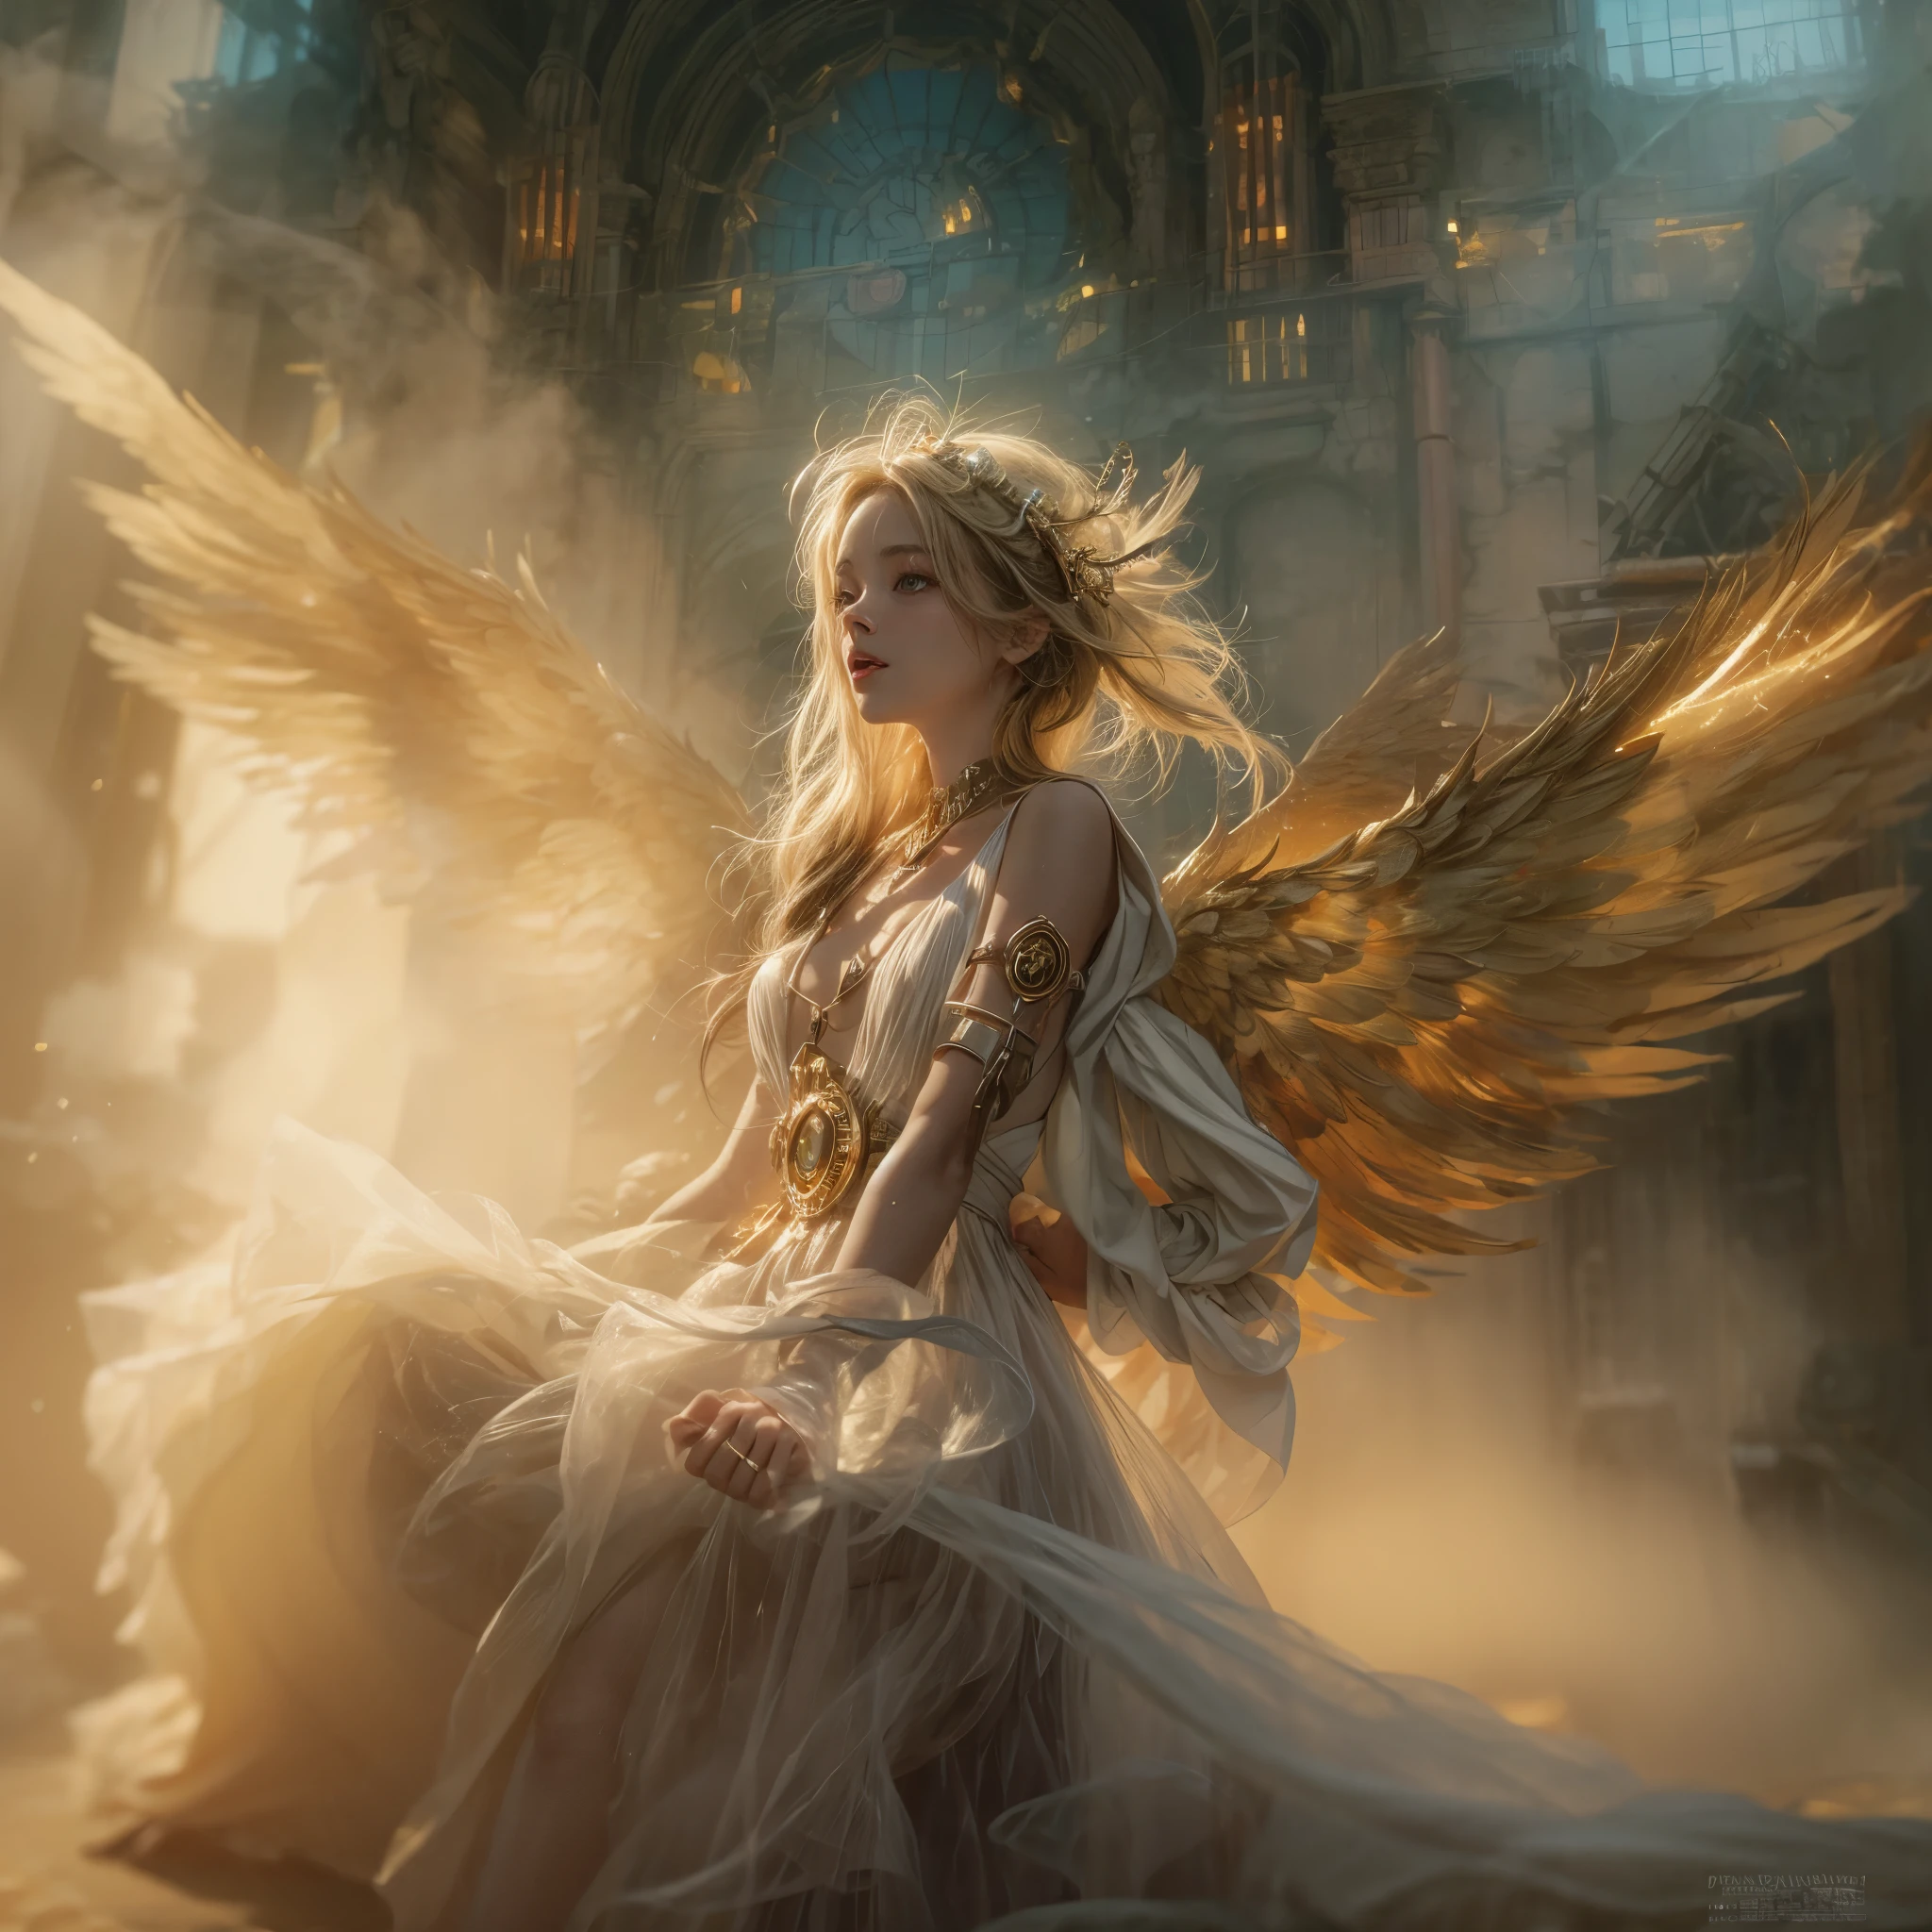 A photograph captures a fleeting moment where a girl embodies the essence of both an angel and a cyberpunk-steampunk muse. Amidst swirling smoke, use the ((golden hour)) to infuse the scene with warmth, highlighting the ((emotional)) juxtaposition of ethereal wings and futuristic elements.